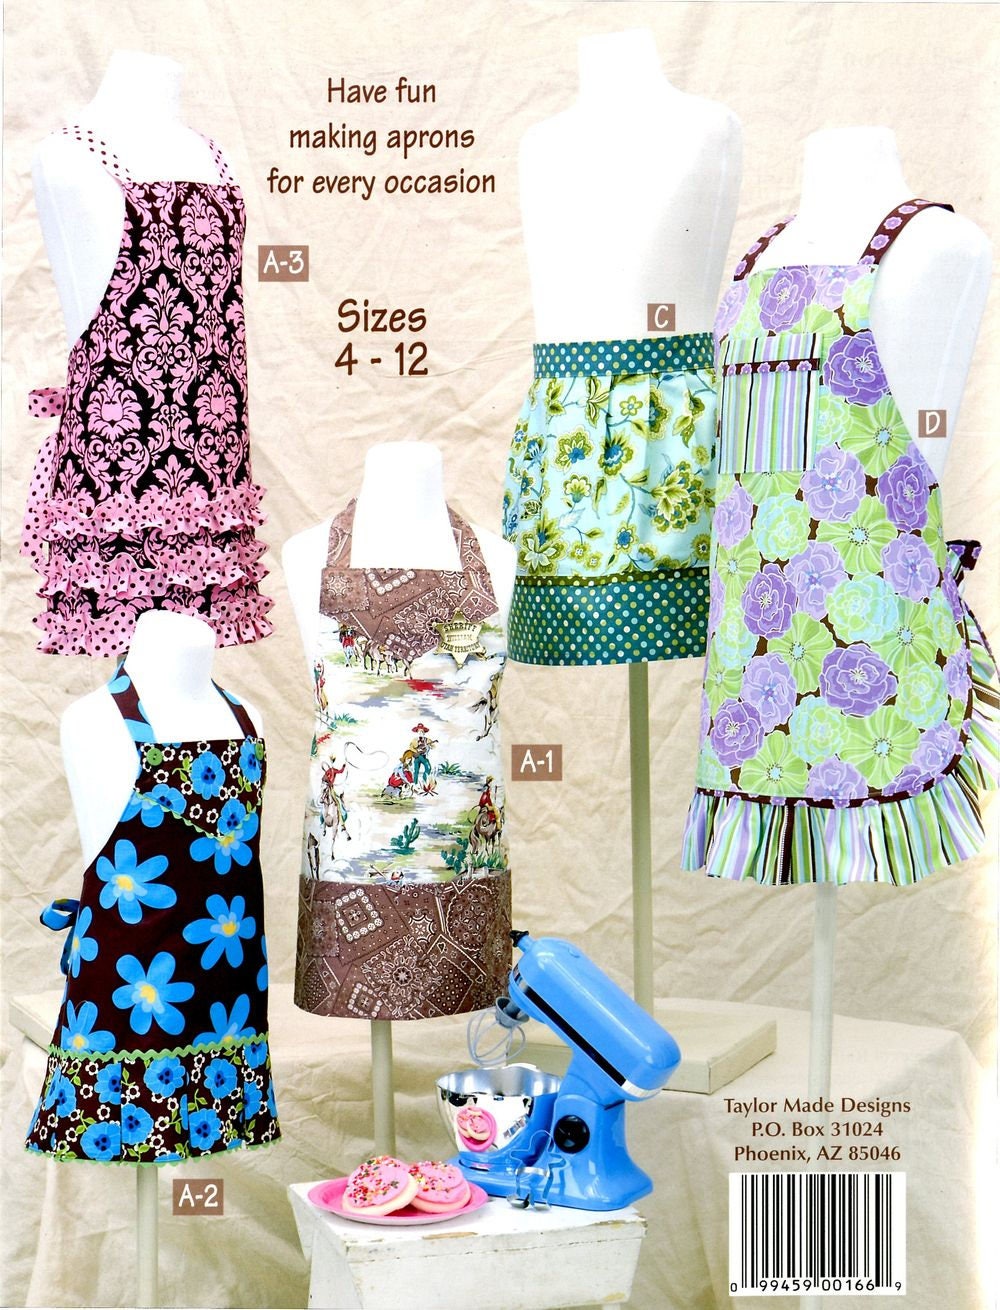 Little Retro Aprons For Kids Sewing Pattern Book by Cindy Taylor Oates of Taylor Made Designs